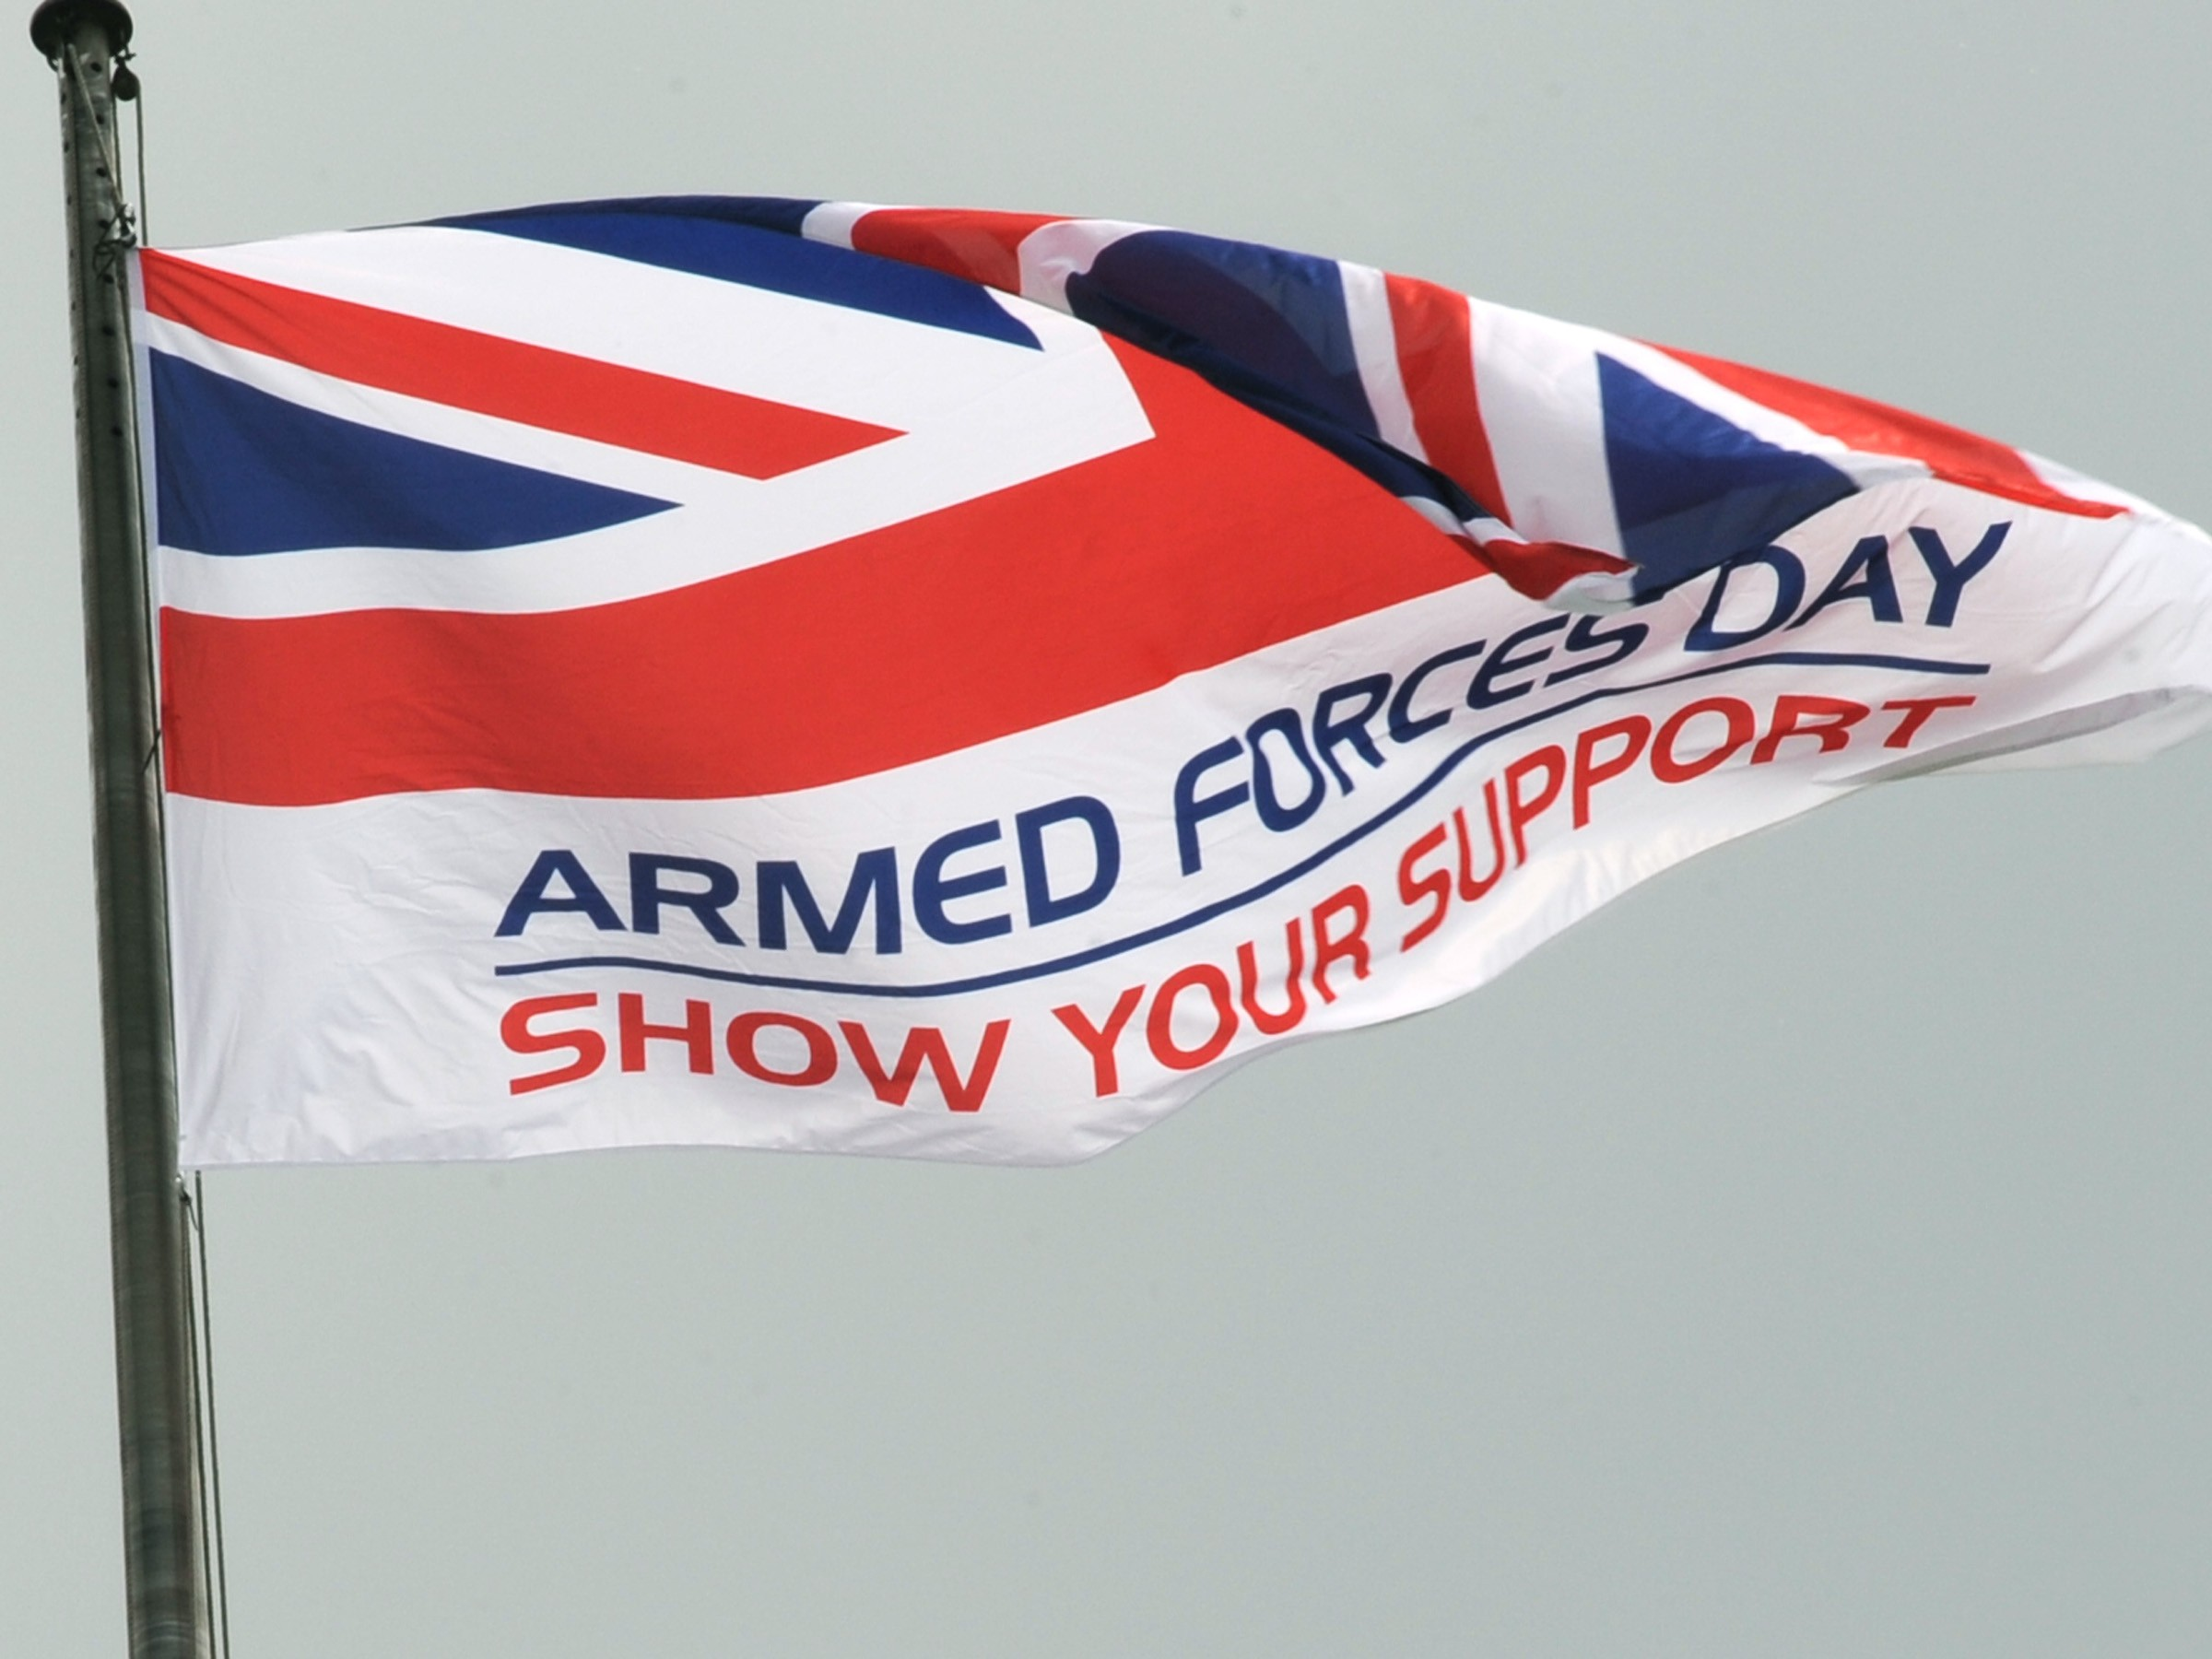 Armed Forces Day - Show your support flag flying